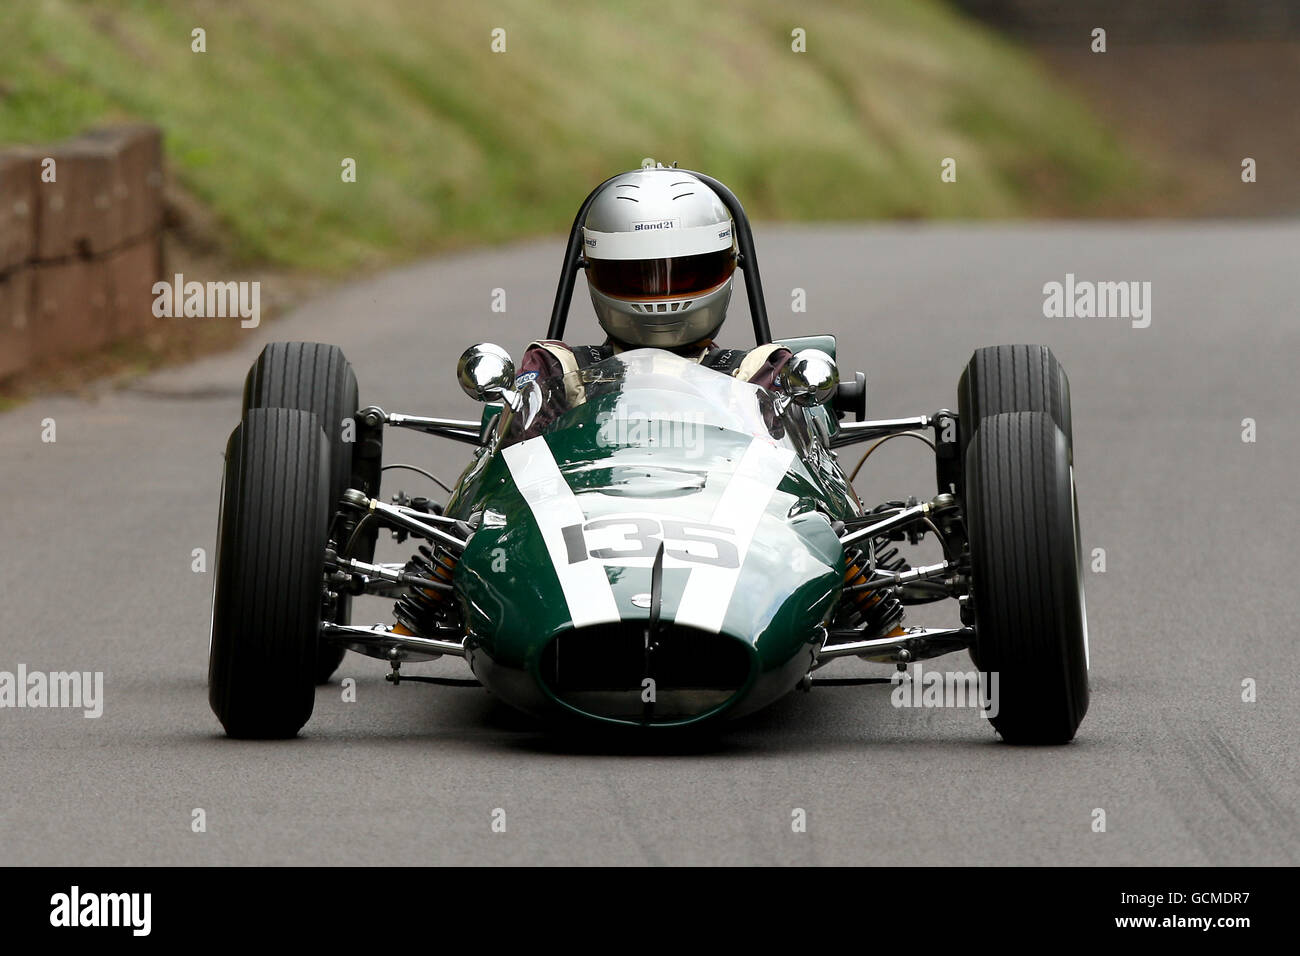 Motor Racing - The Shelsley Midsummer and Classic Meetings - Day Two - Shelsley Walsh. Malcolm Wishart and his 1963 Cooper T65 FJ during Shelsley Walsh Hill Climb, Worcestershire. Stock Photo